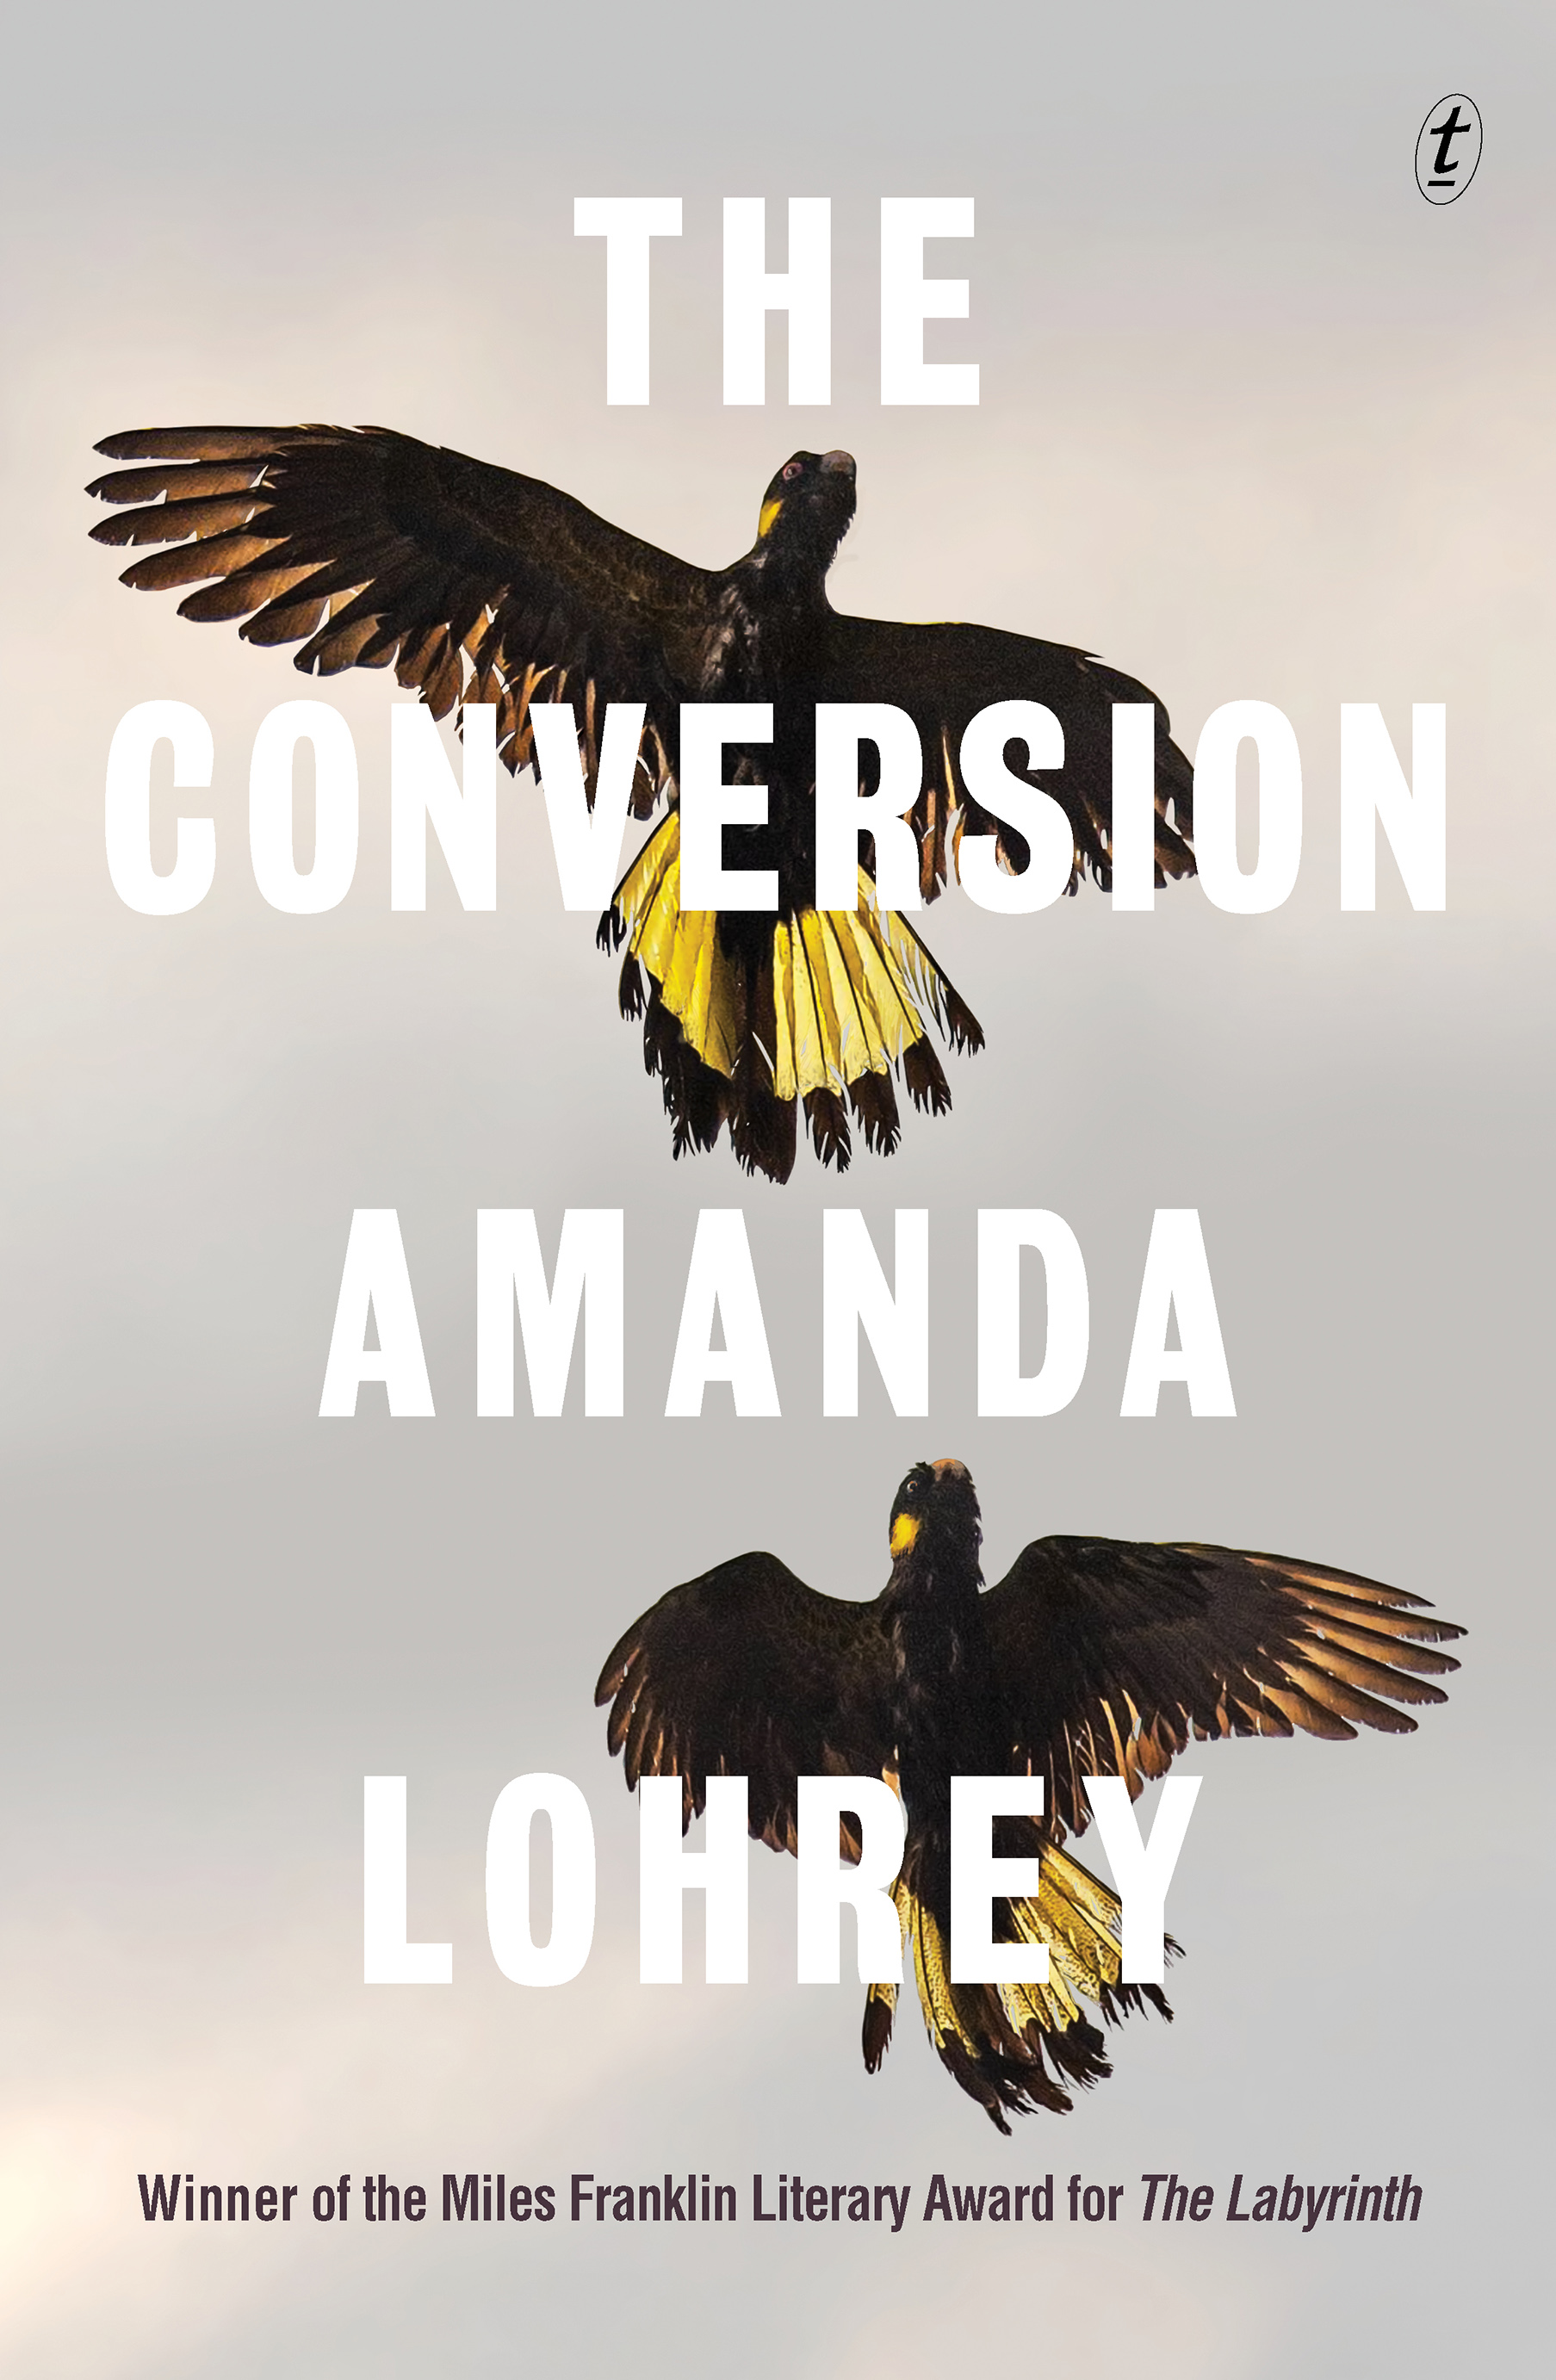 A book cover showing two birds with wings outstretched against a cloudy backdrop, with text overlaid